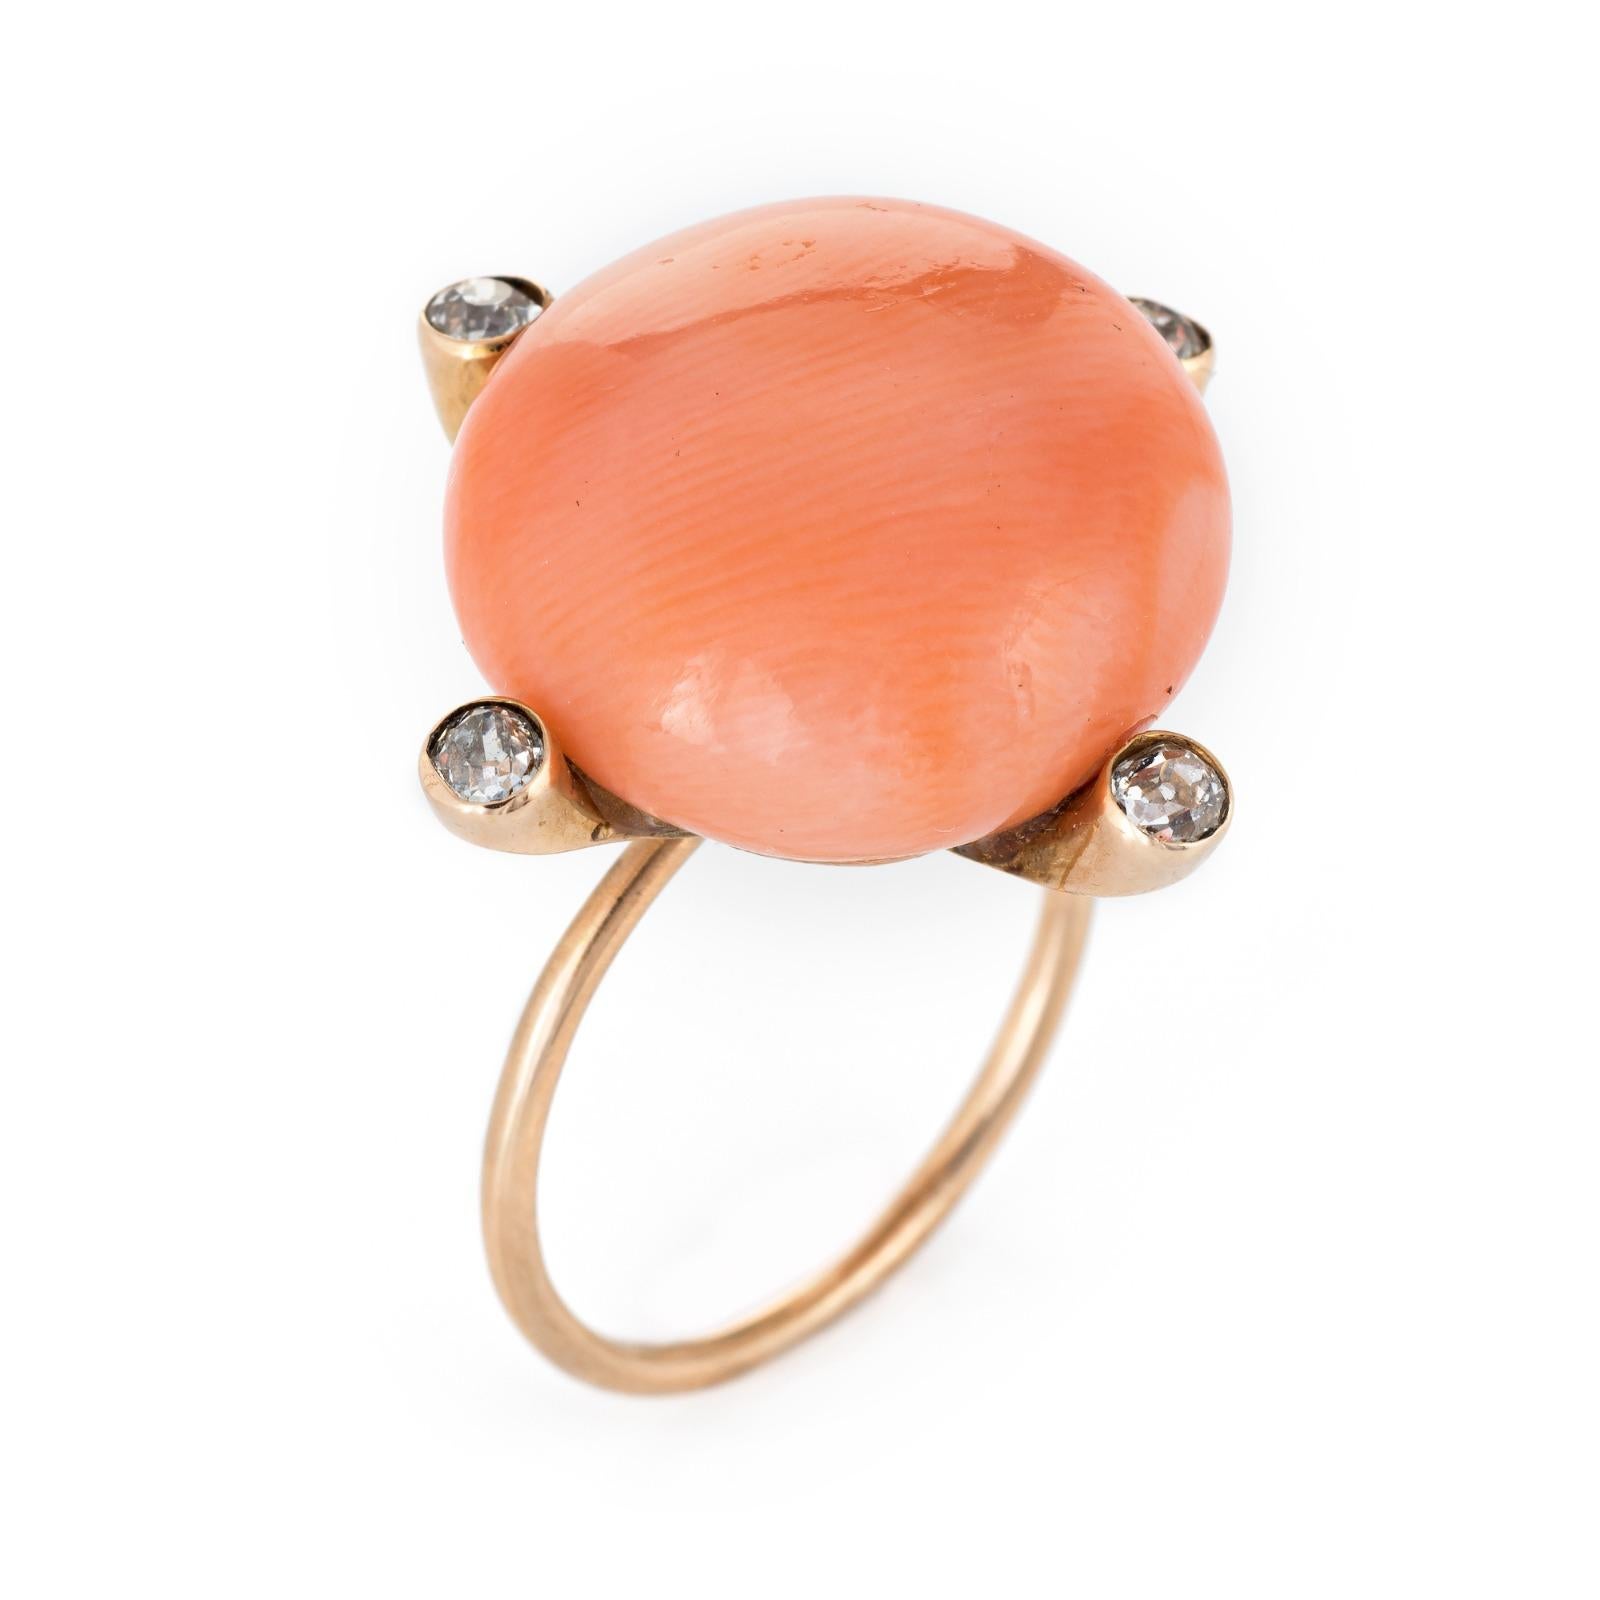 Finely detailed antique Victorian era ring (circa 1880s to 1900s) crafted in 14k yellow gold. 

Coral cabochon measures 18mm diameter, accented with four estimated 0.05 carat old mint cut diamonds. The total diamond weight is estimated at 0.20